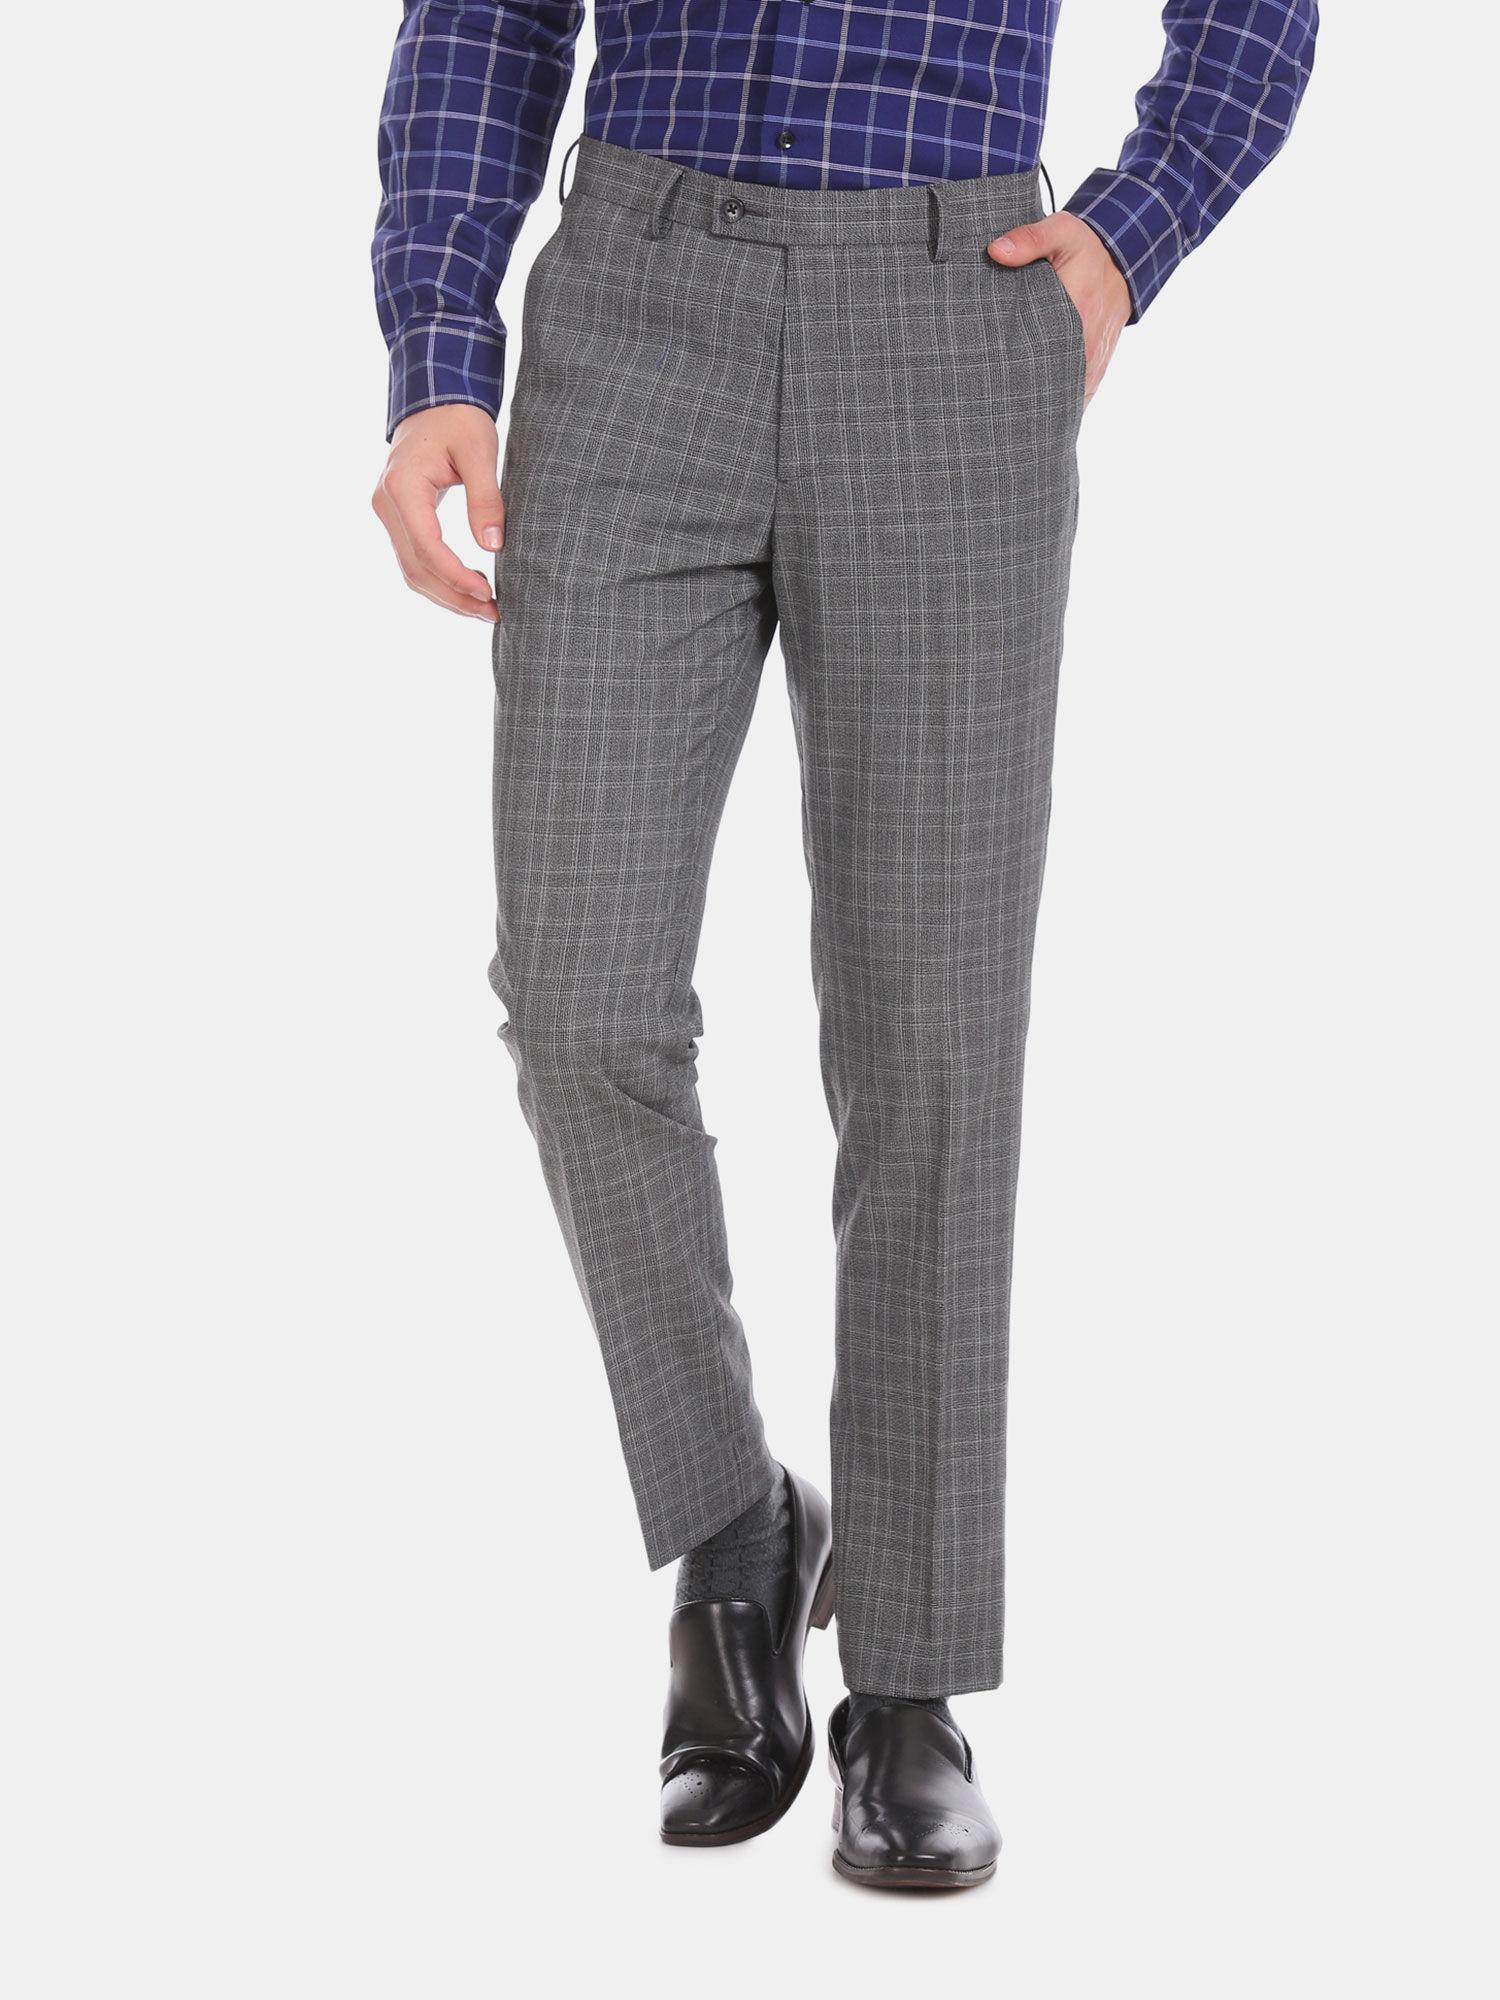 men grey slim fit patterned check formal trousers